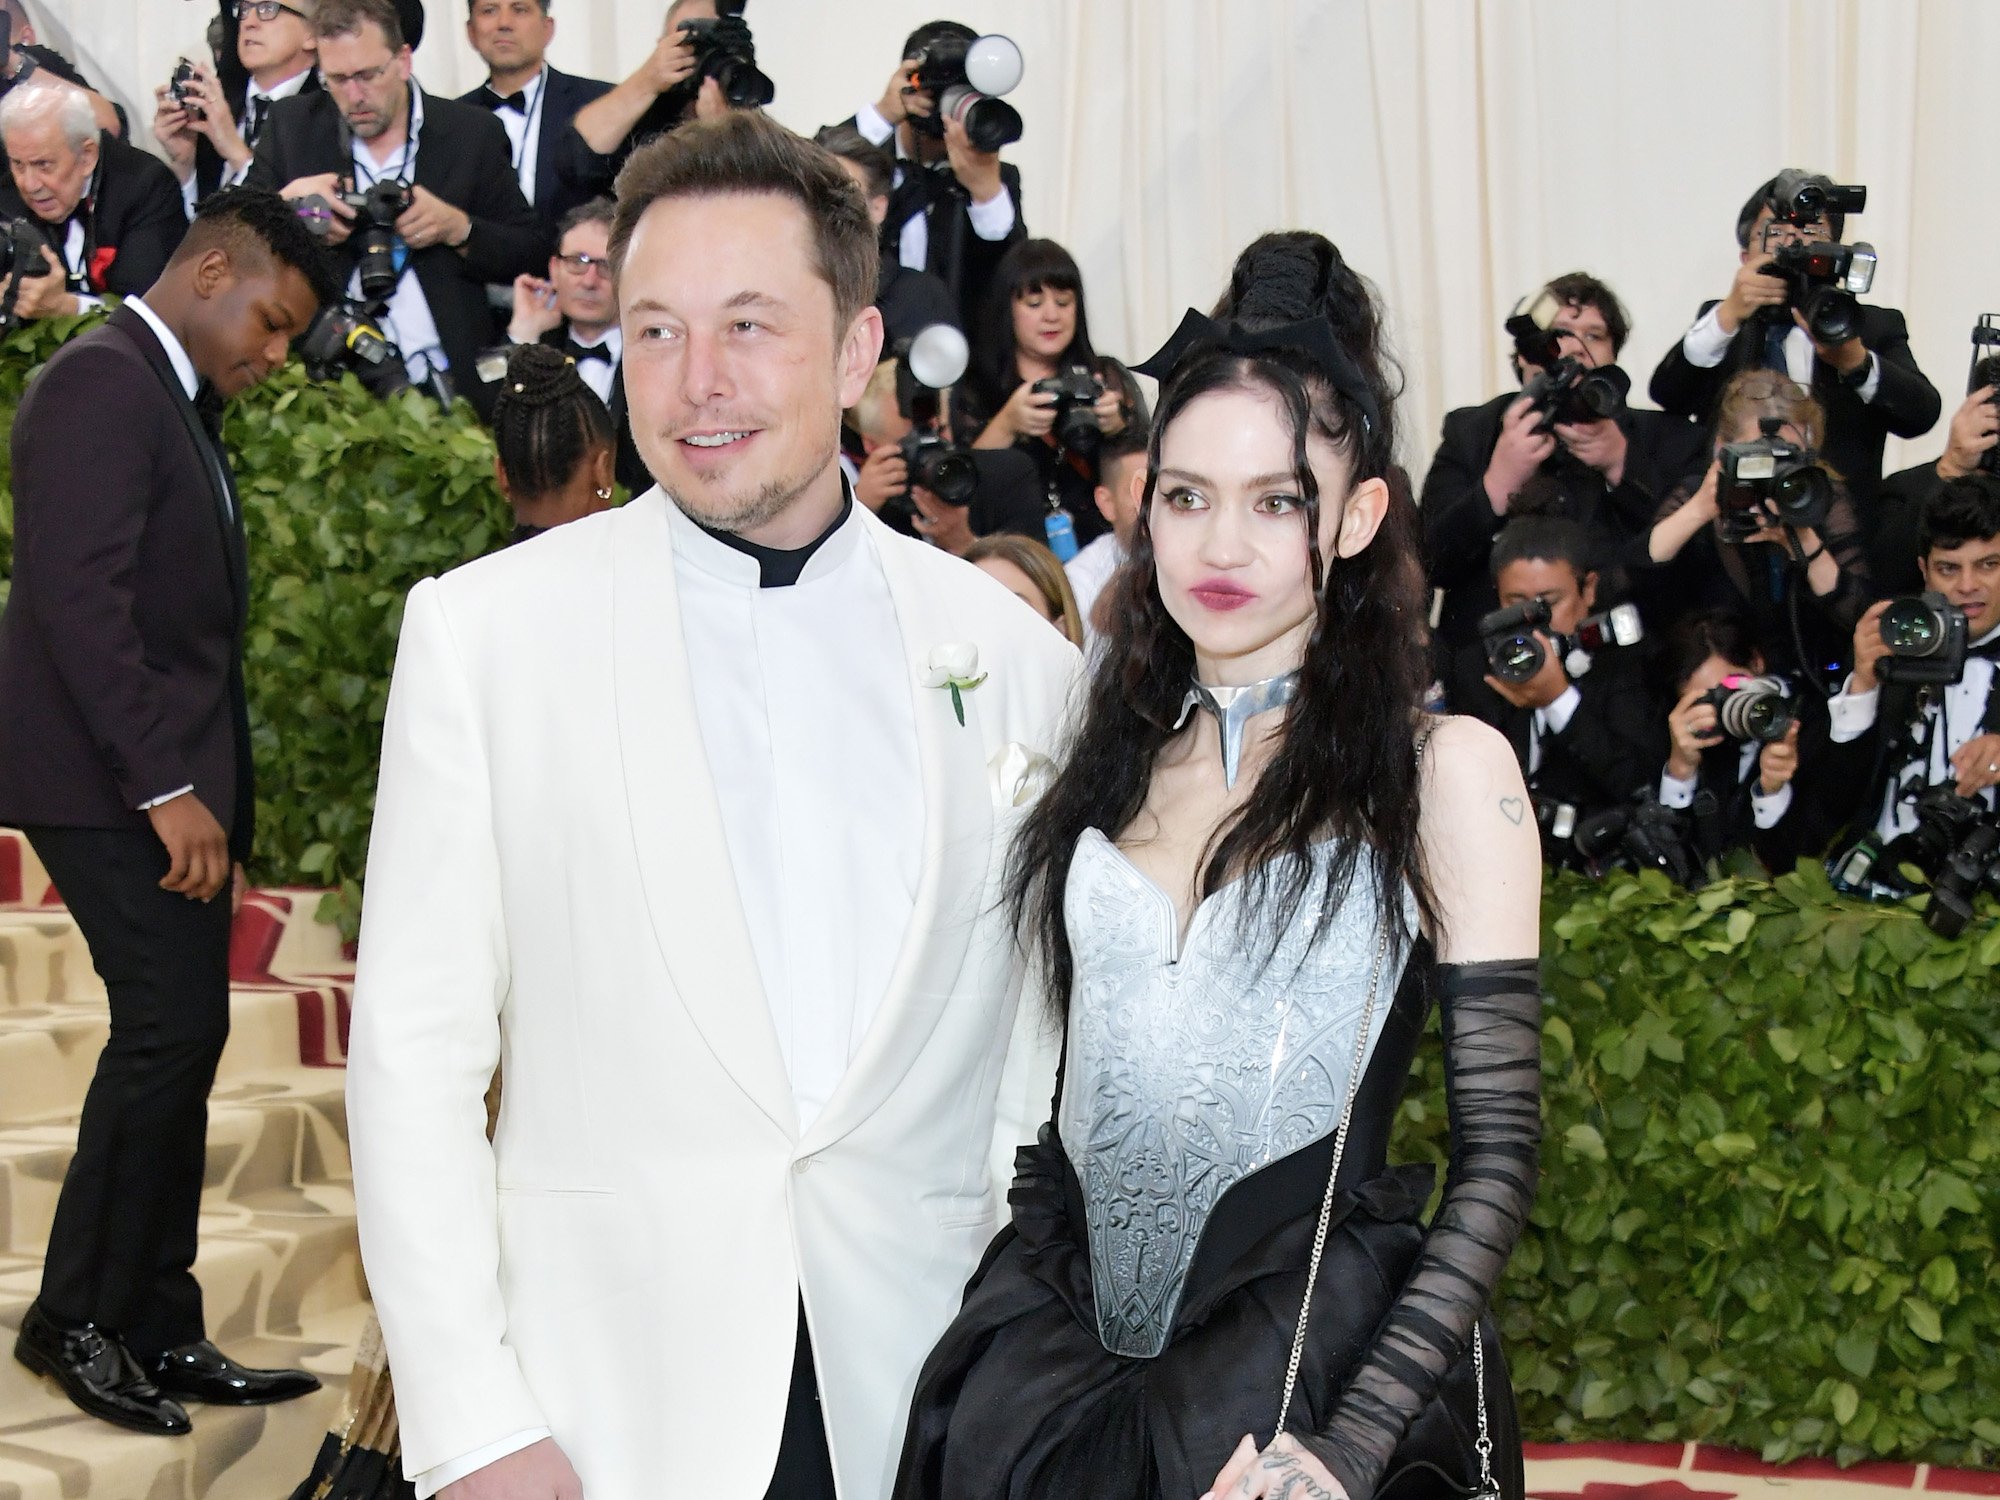 Elon Musk Is Dating Musician Grimes After They Joked About Artificial ...